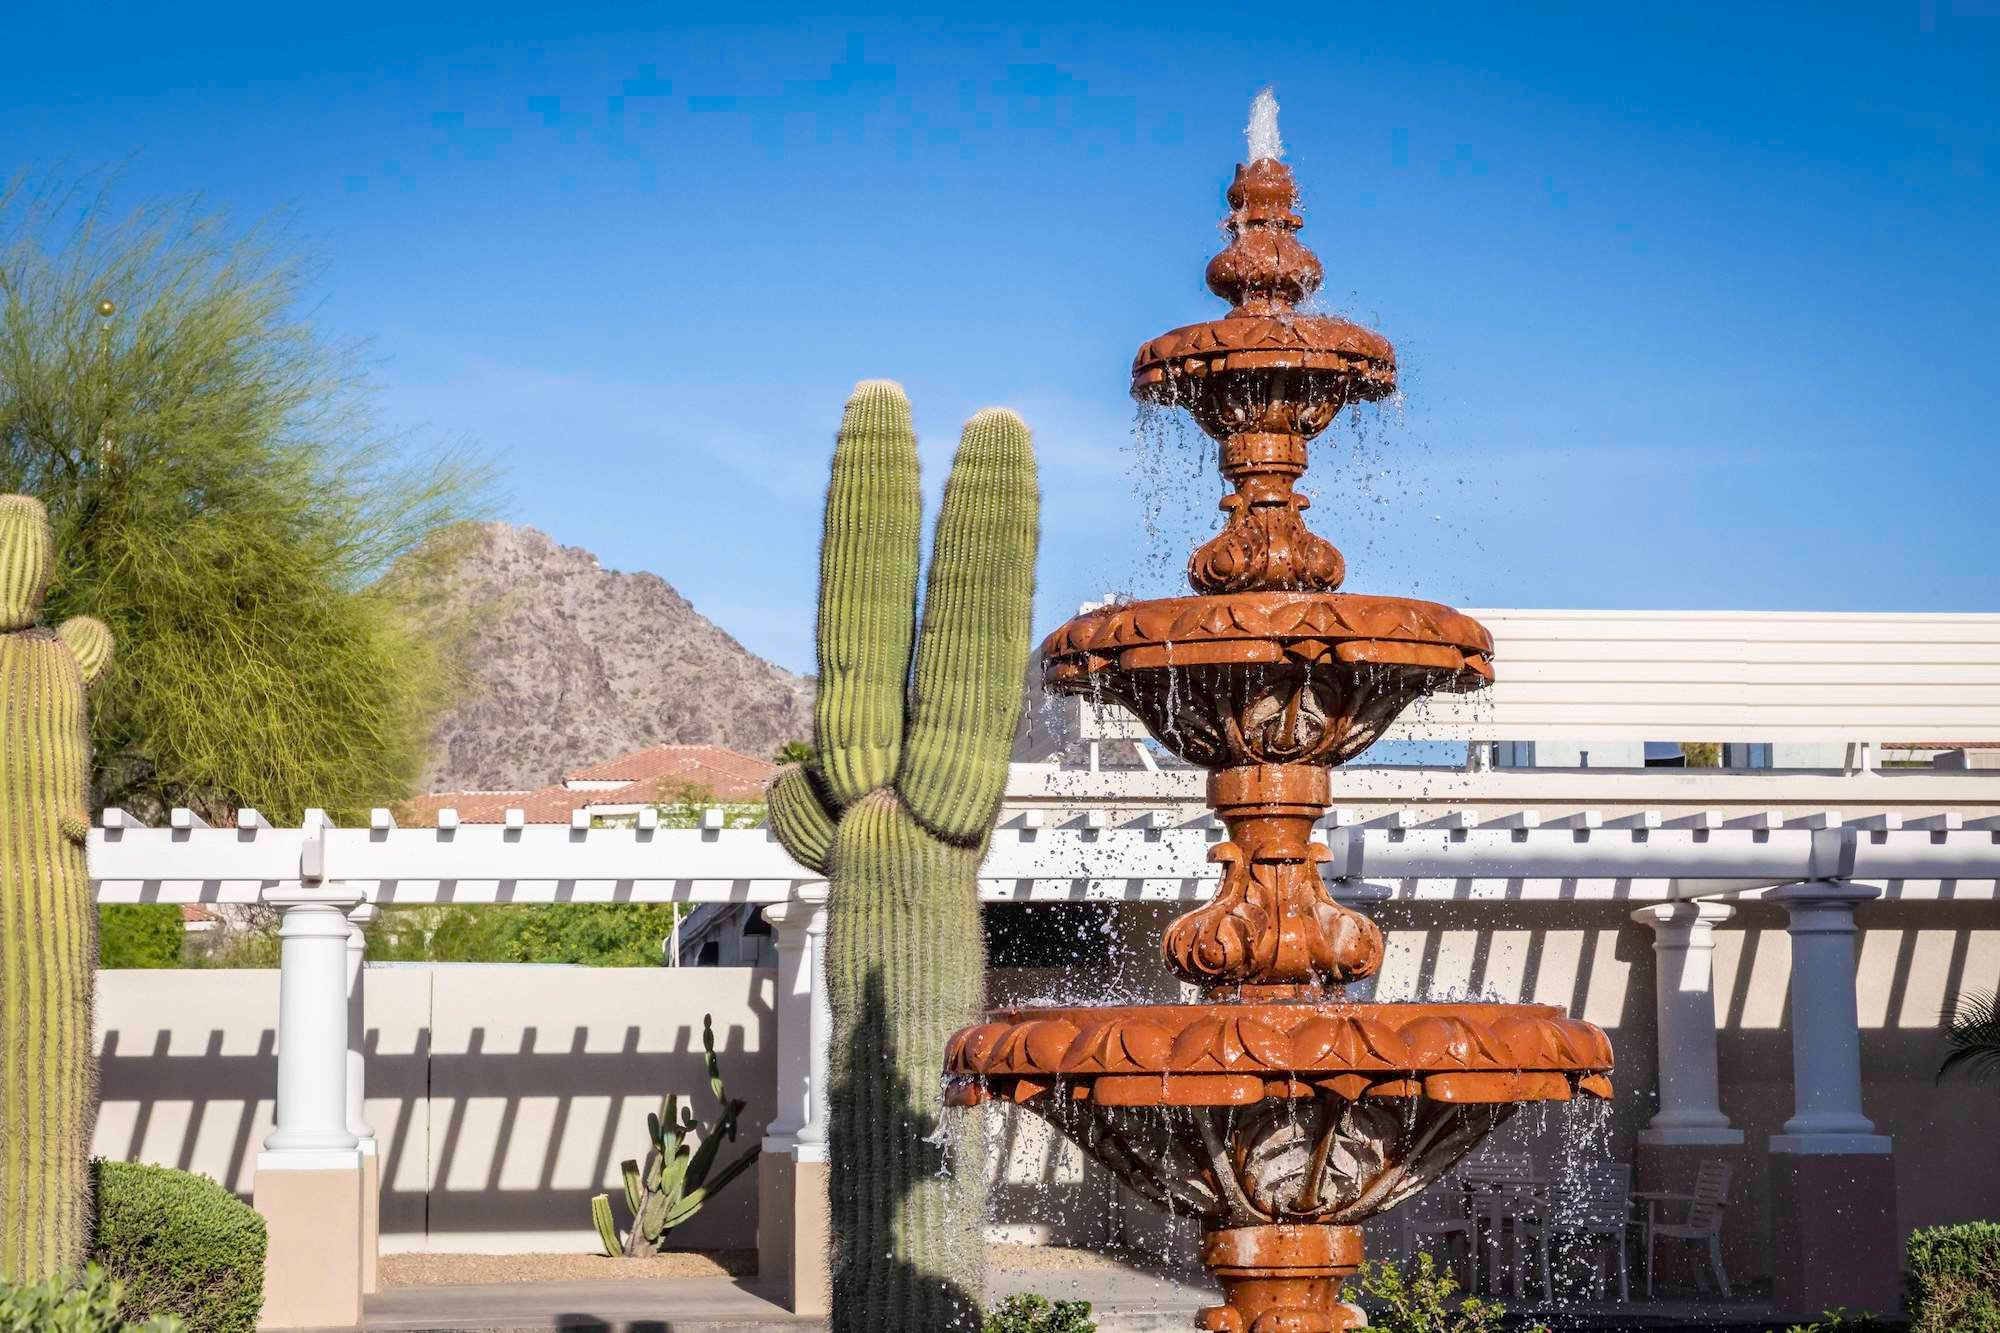  Outdoor water fountain and cactus at The Terraces of Phoenix